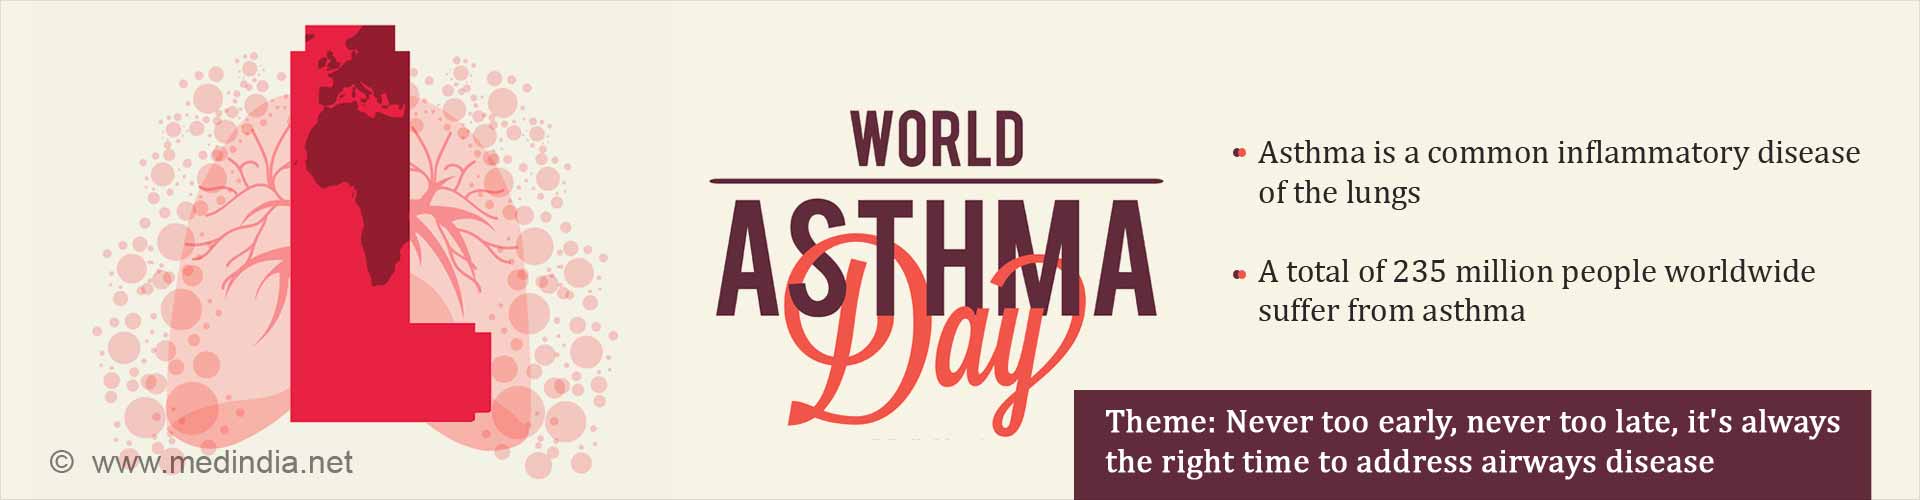 world asthma day
- asthma ia a common inflammatory disease of the lungs
- a total of 235 million people worldwide suffer from asthma
Theme: Never too early, never too late, it''s always the right time to address airways disease